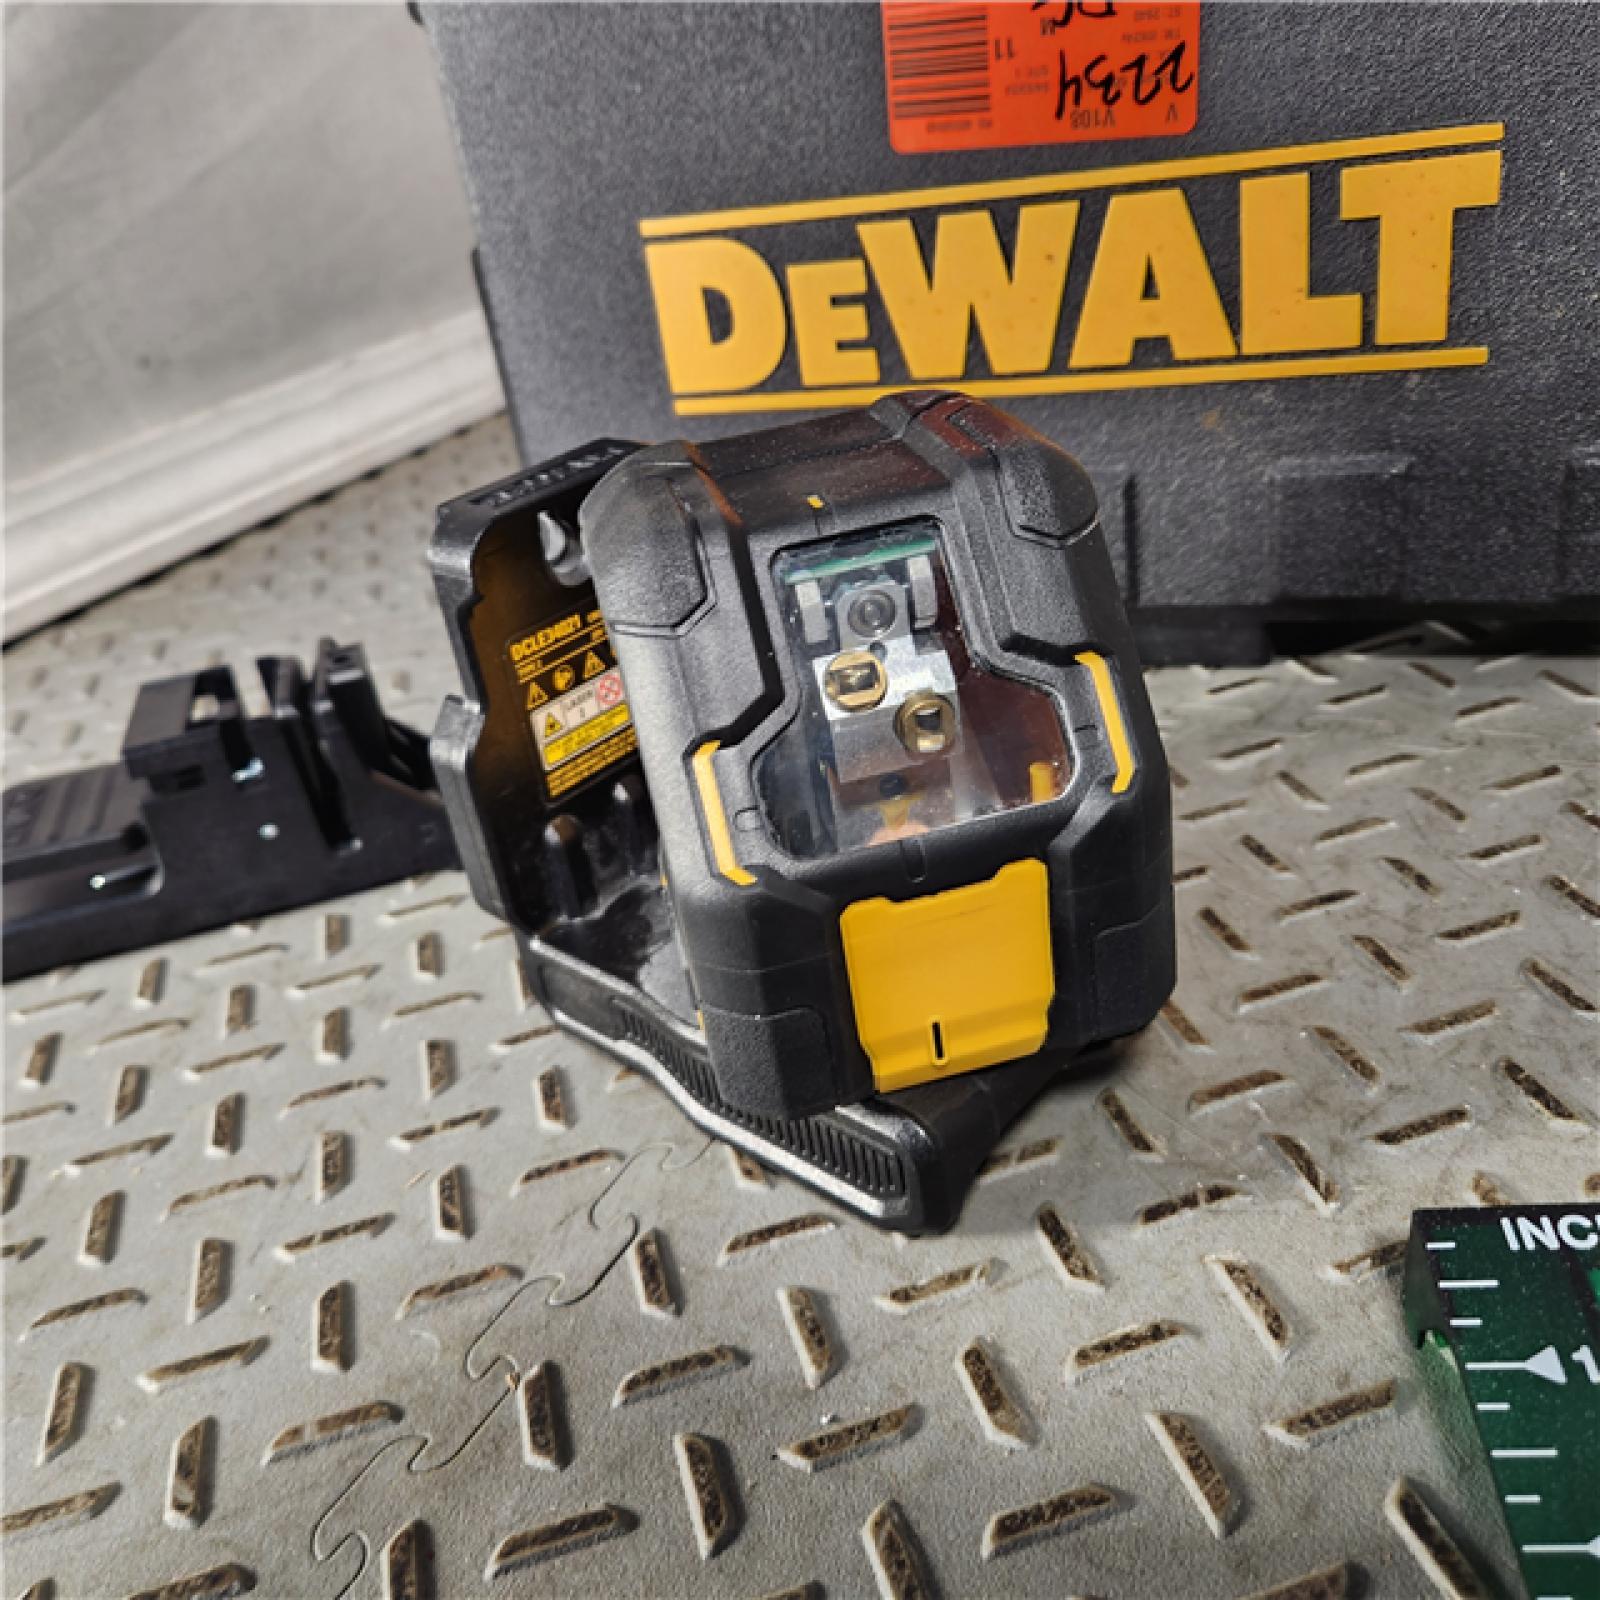 Houston Location - AS-IS DeWalt DCLE34021 18v XR Cordless Cross Line Self Levelling Green Laser Level - Appears IN GOOD Condition